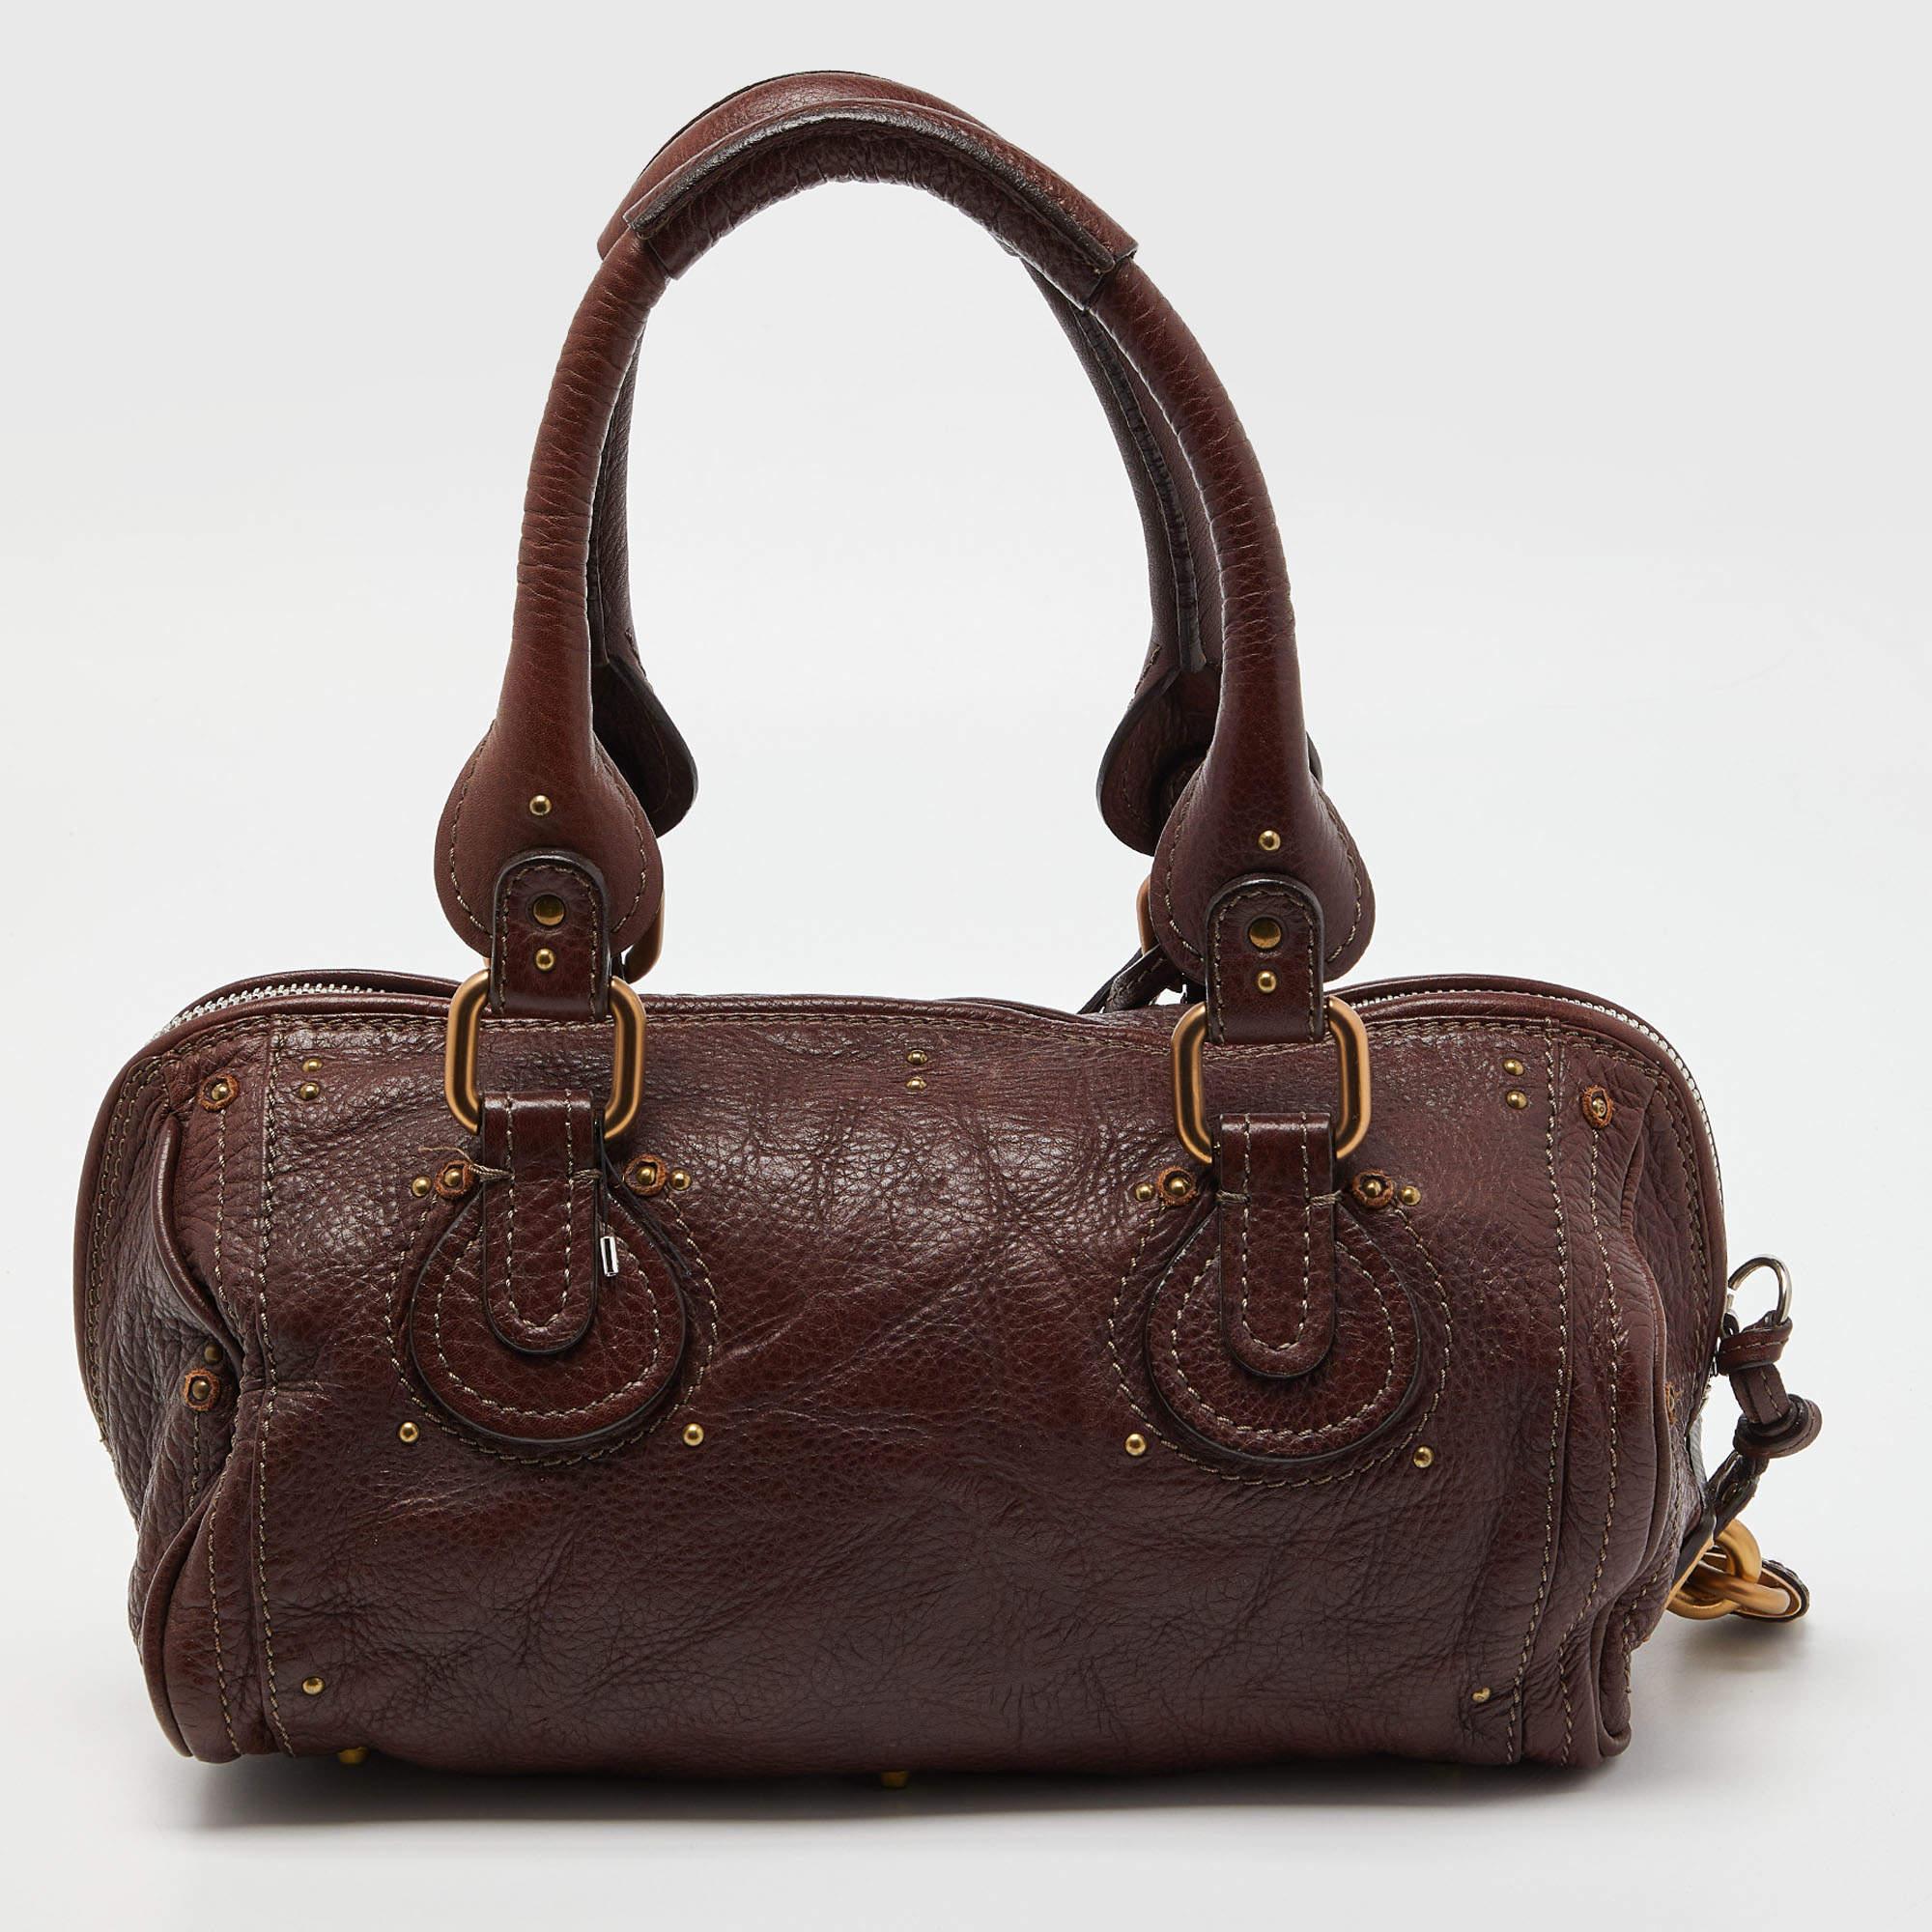 Chole’s Paddington bag is glamorous indeed with a retro vibe with two-tone metal accents. Crafted from burgundy leather, the interior is quite roomy and can house all your essentials. The bag features dual handles and is perfect for everyday